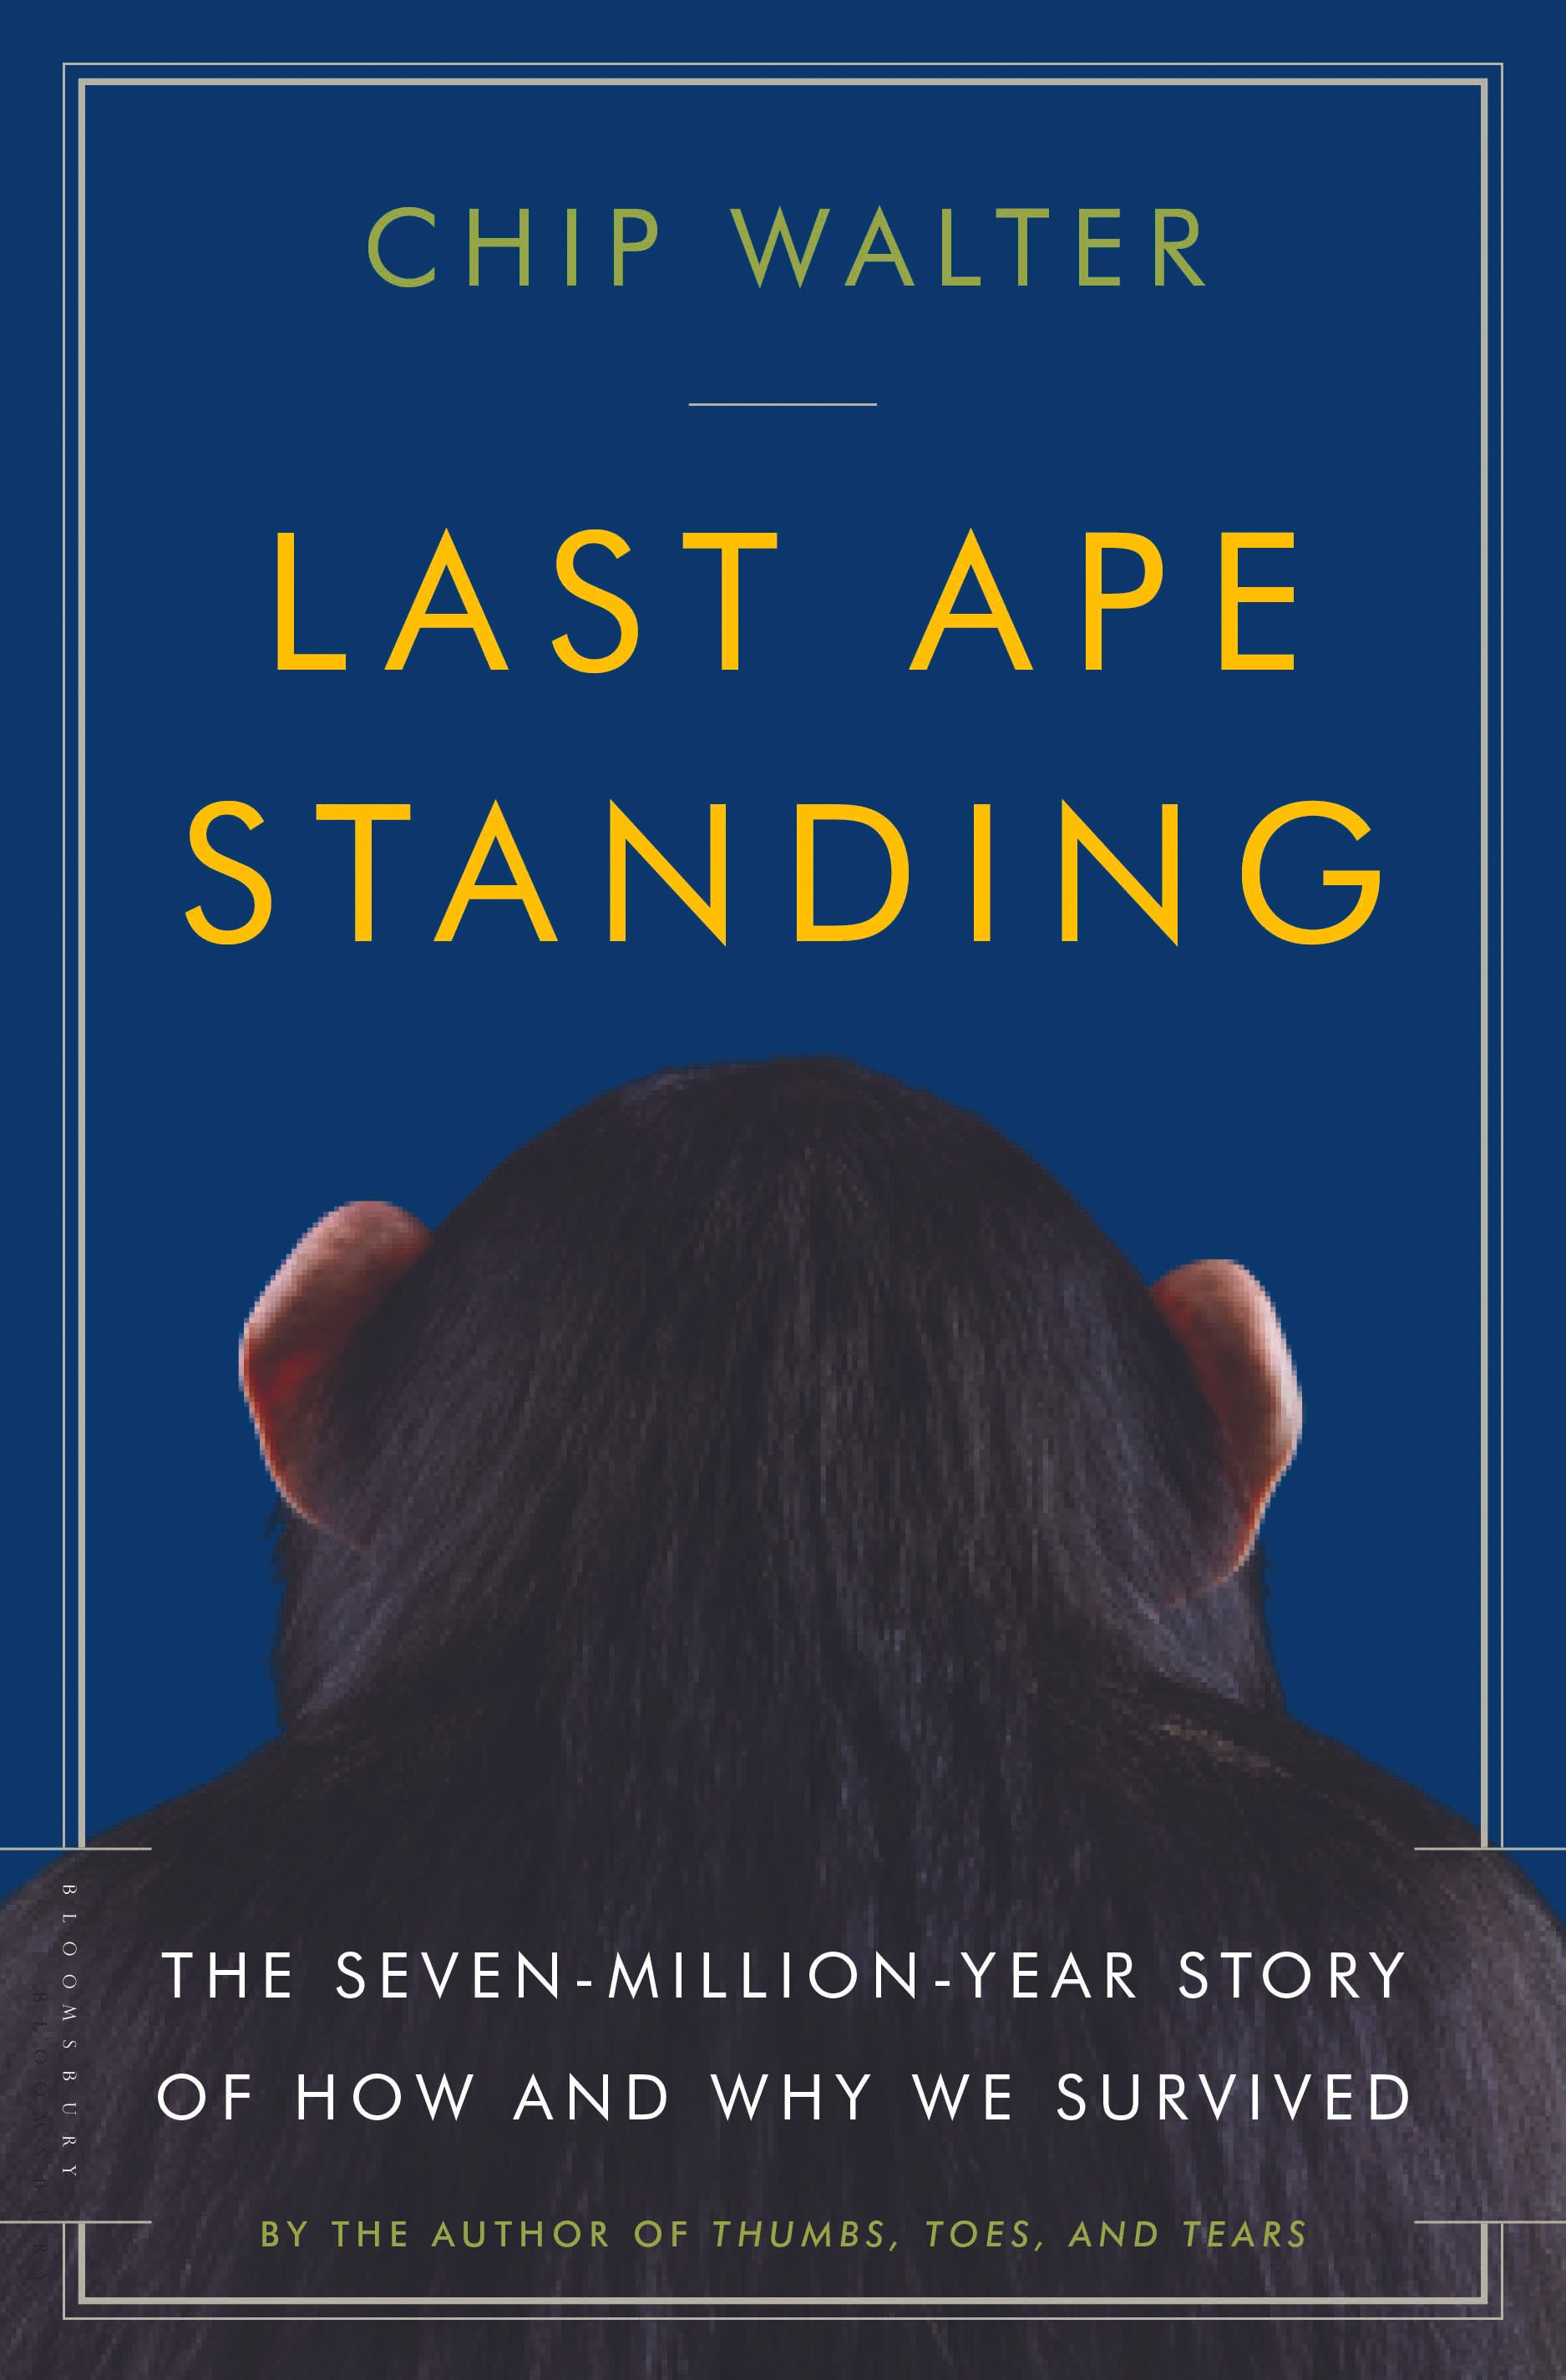 Cover of Chip Walter's book Last Ape Standing